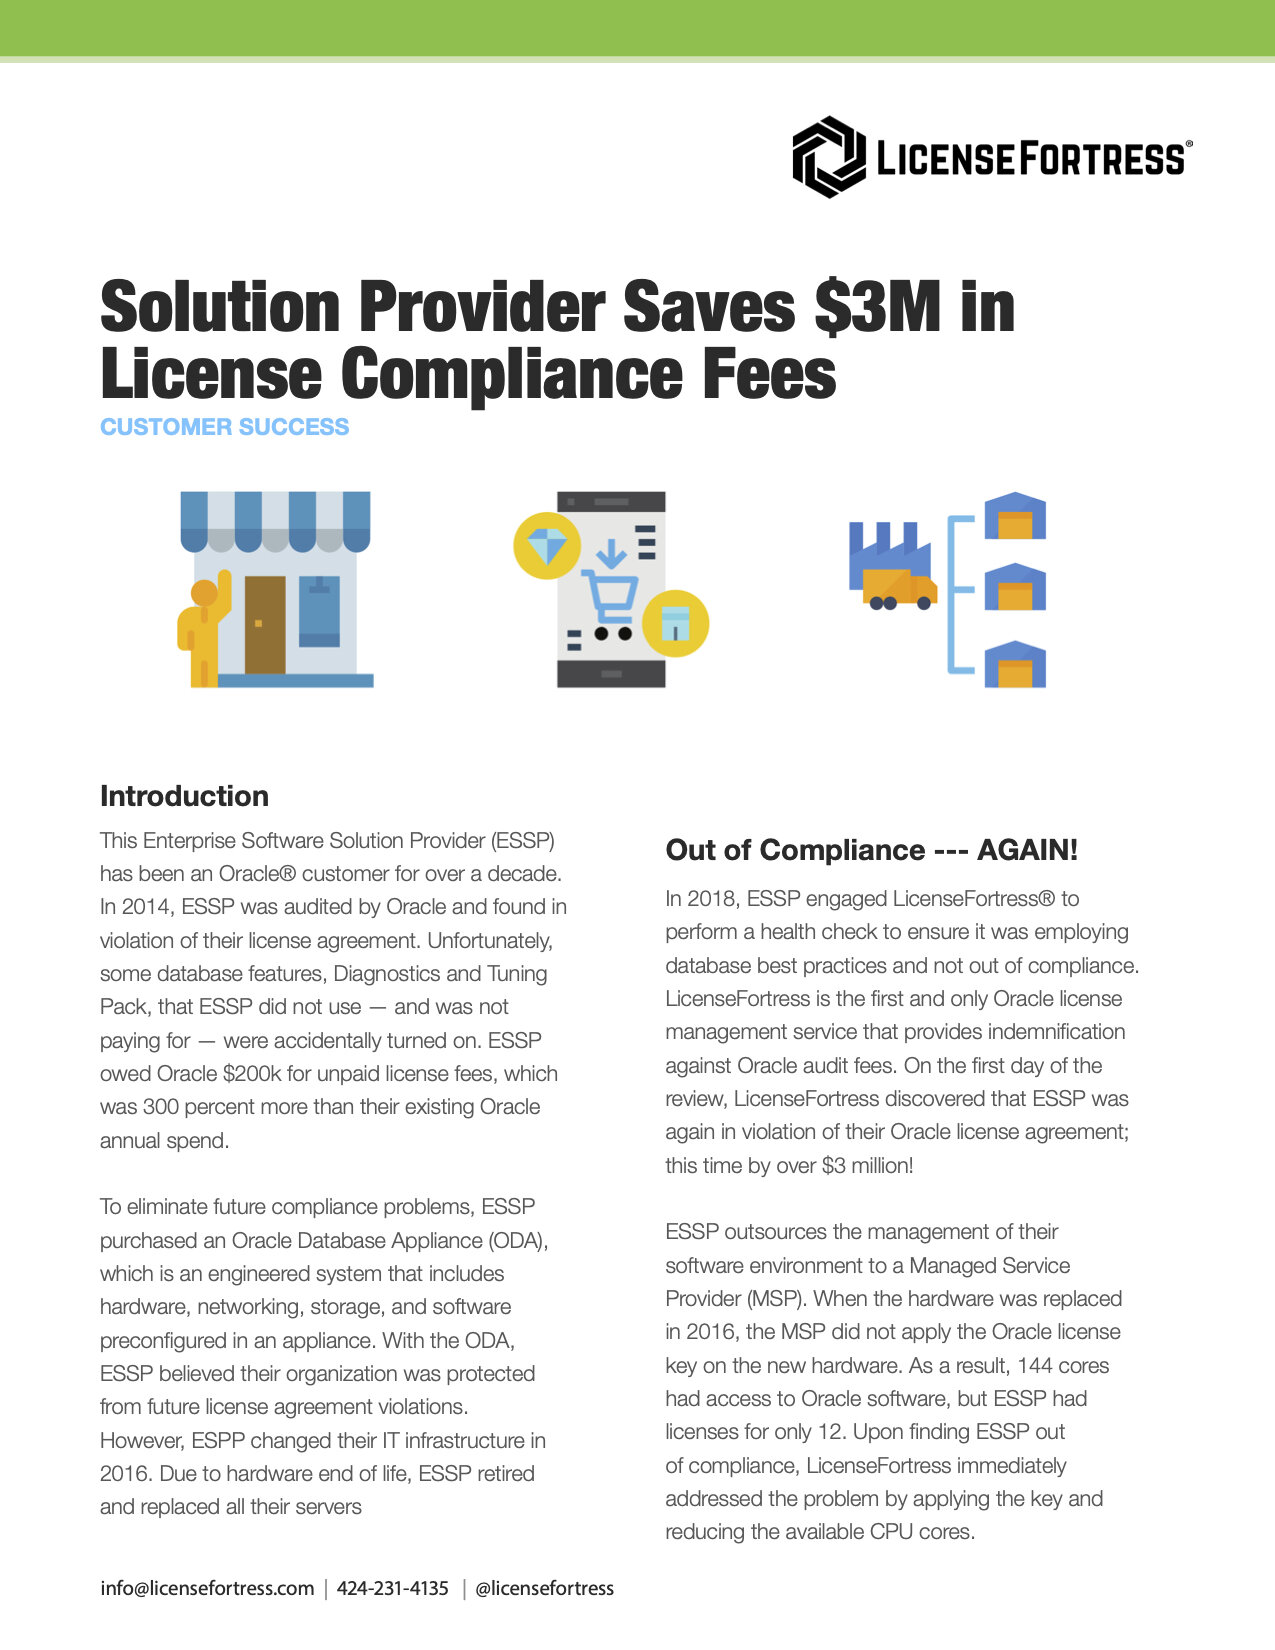 Cover Page Solution Provider Saves $3M in License Compliance Fees.jpg